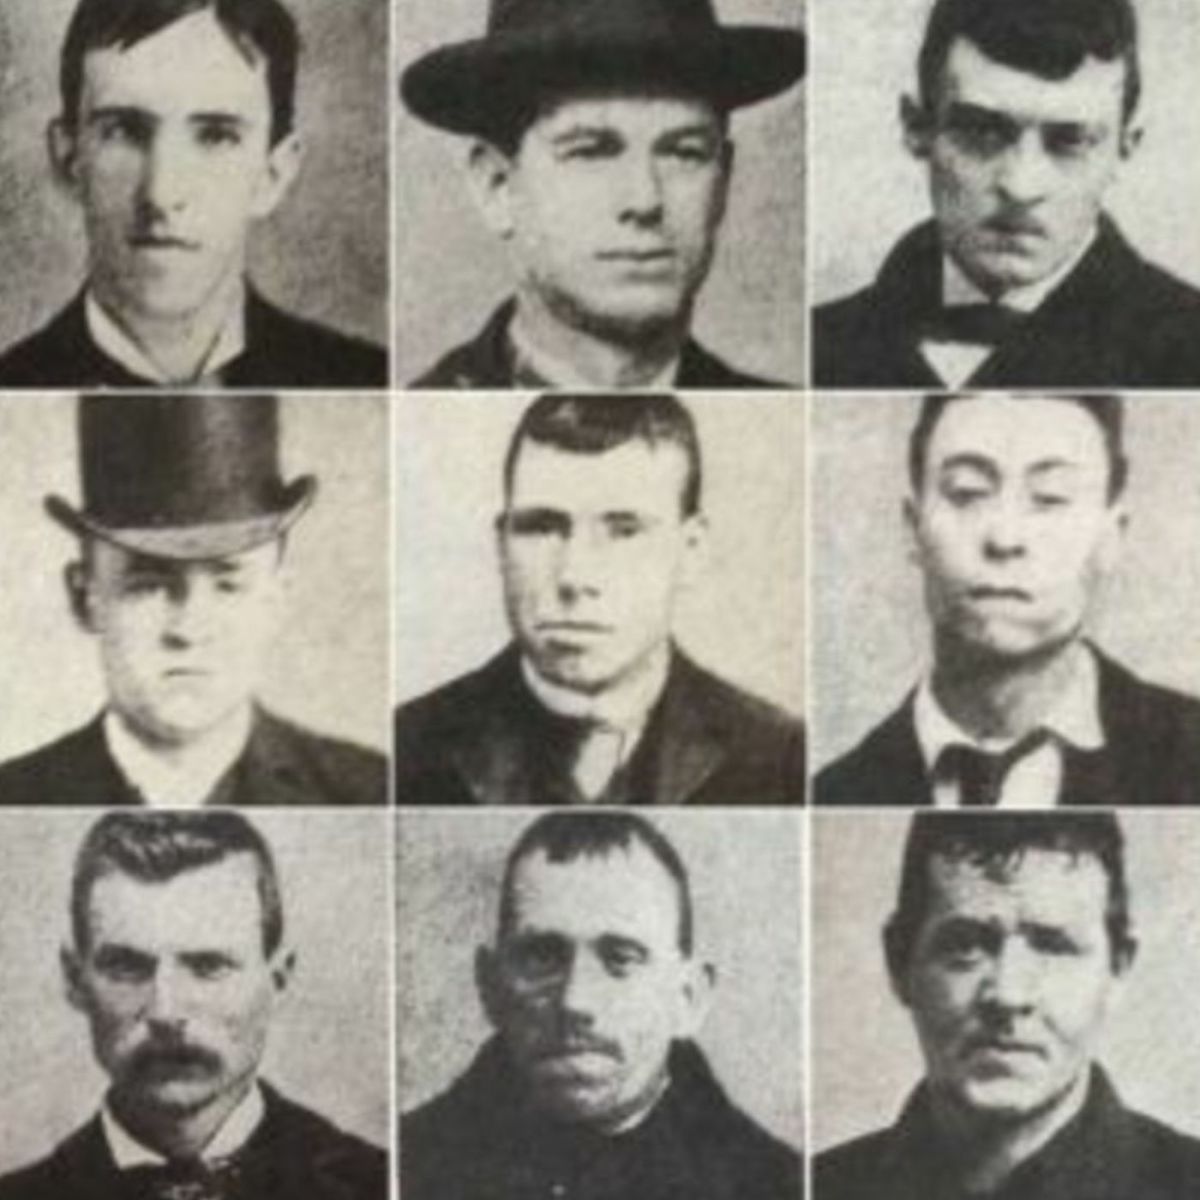 A rogue’s gallery of Whyo gangsters. Top row (left to right) Baboon Connolly, Josh Hines, Bull Hurley. Middle row: Clops Connolly, Dorsey Doyle, Googy Corcoran. Bottom row: Mike Lloyd, Piker Ryan, Red Rocks Farrell